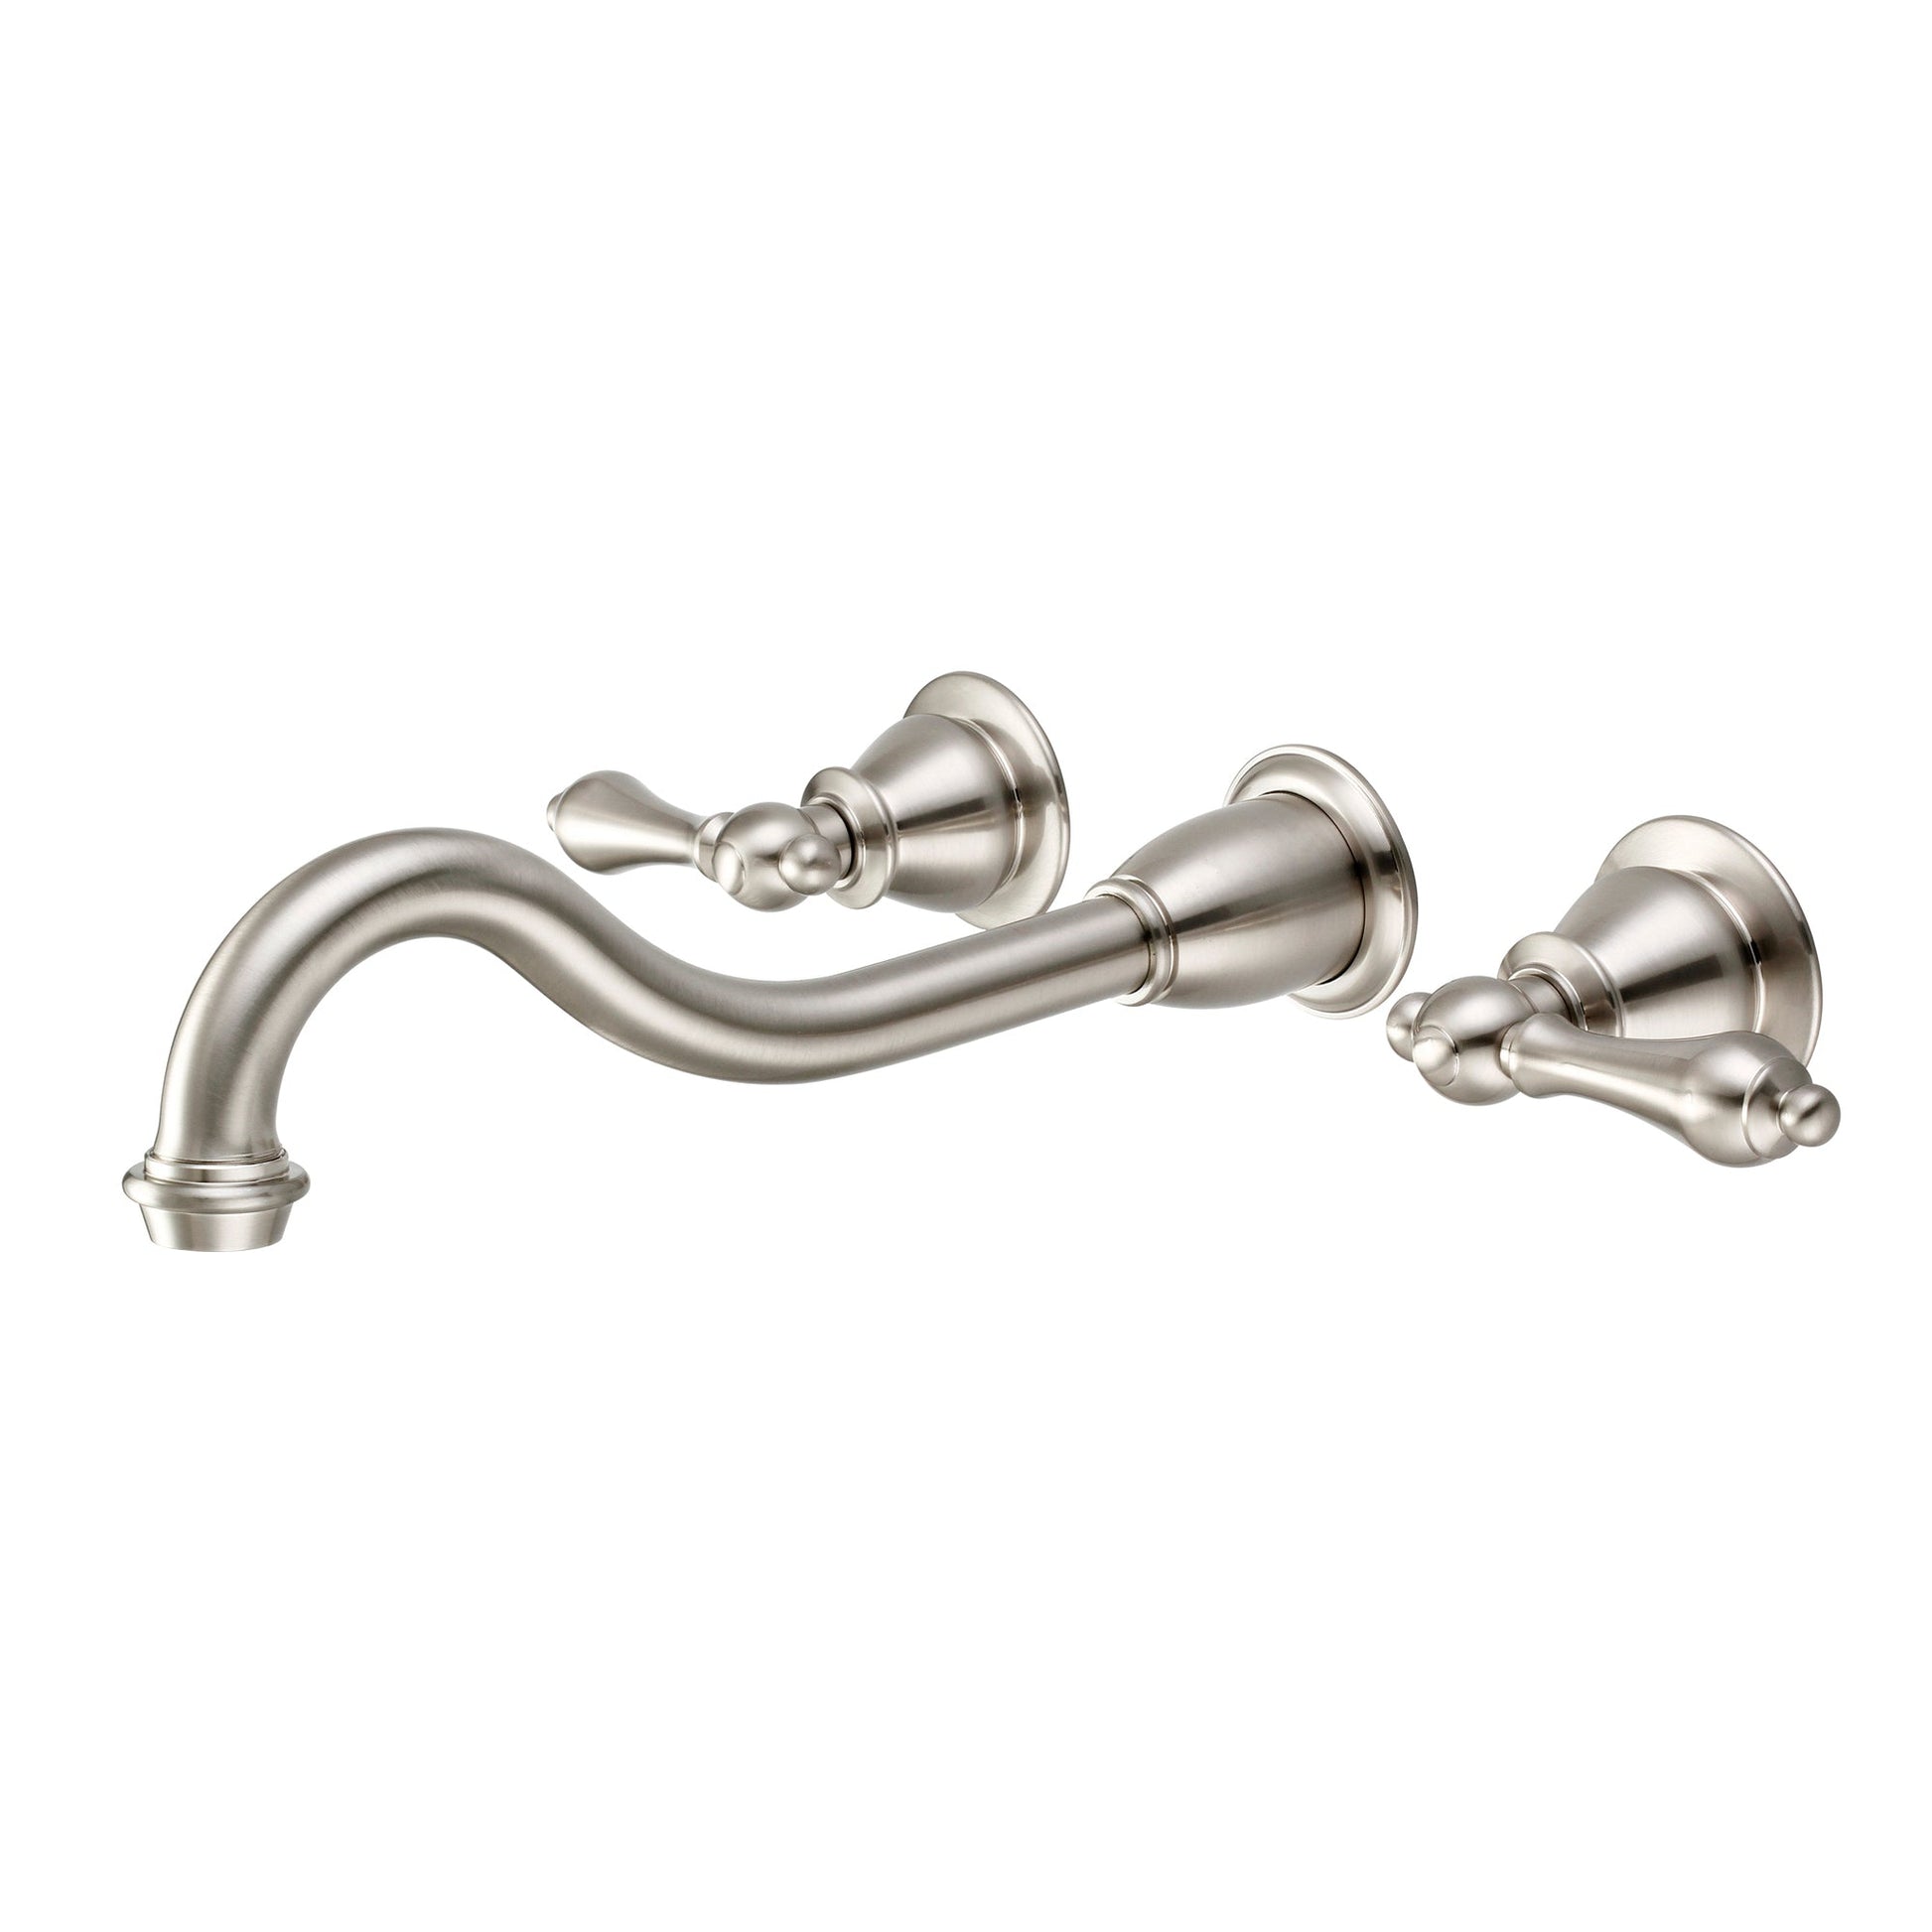 Water Creation Elegant Spout Wall Mount Vessel/Lavatory F4-0001 8" Grey Solid Brass Faucet With Metal Lever Handles Without Labels